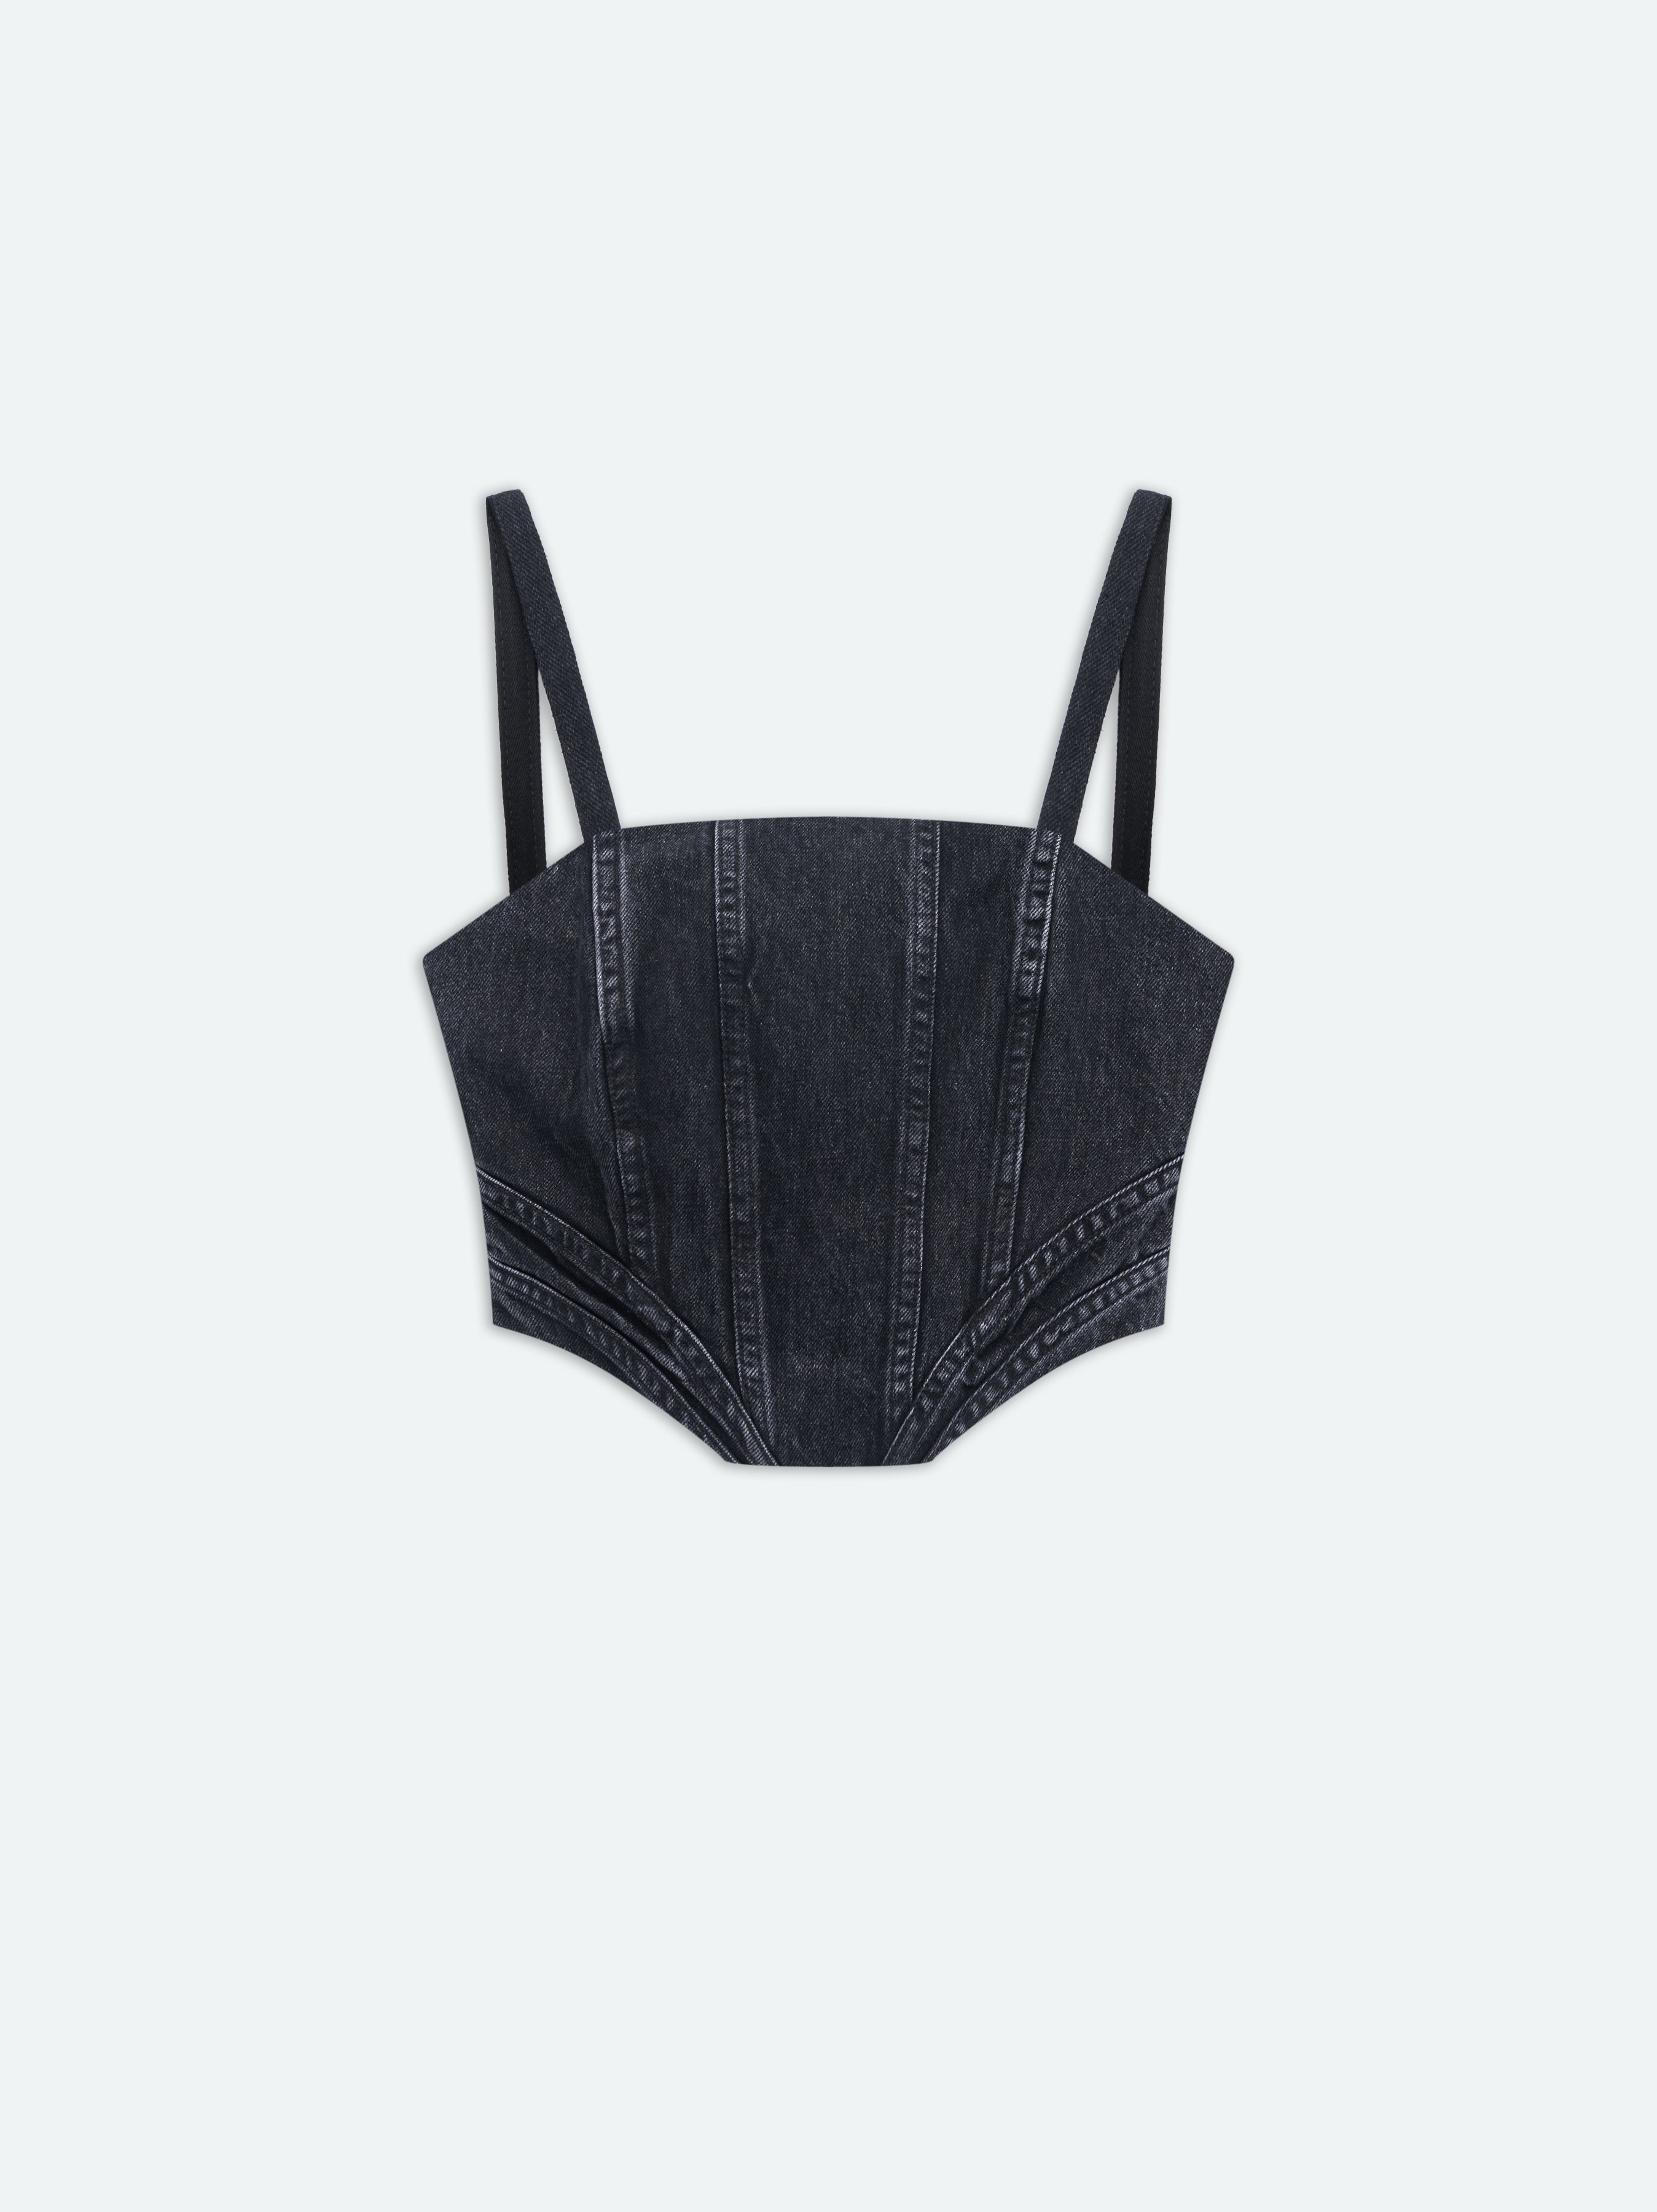 Product WOMEN - CORSET - Faded Black featured image